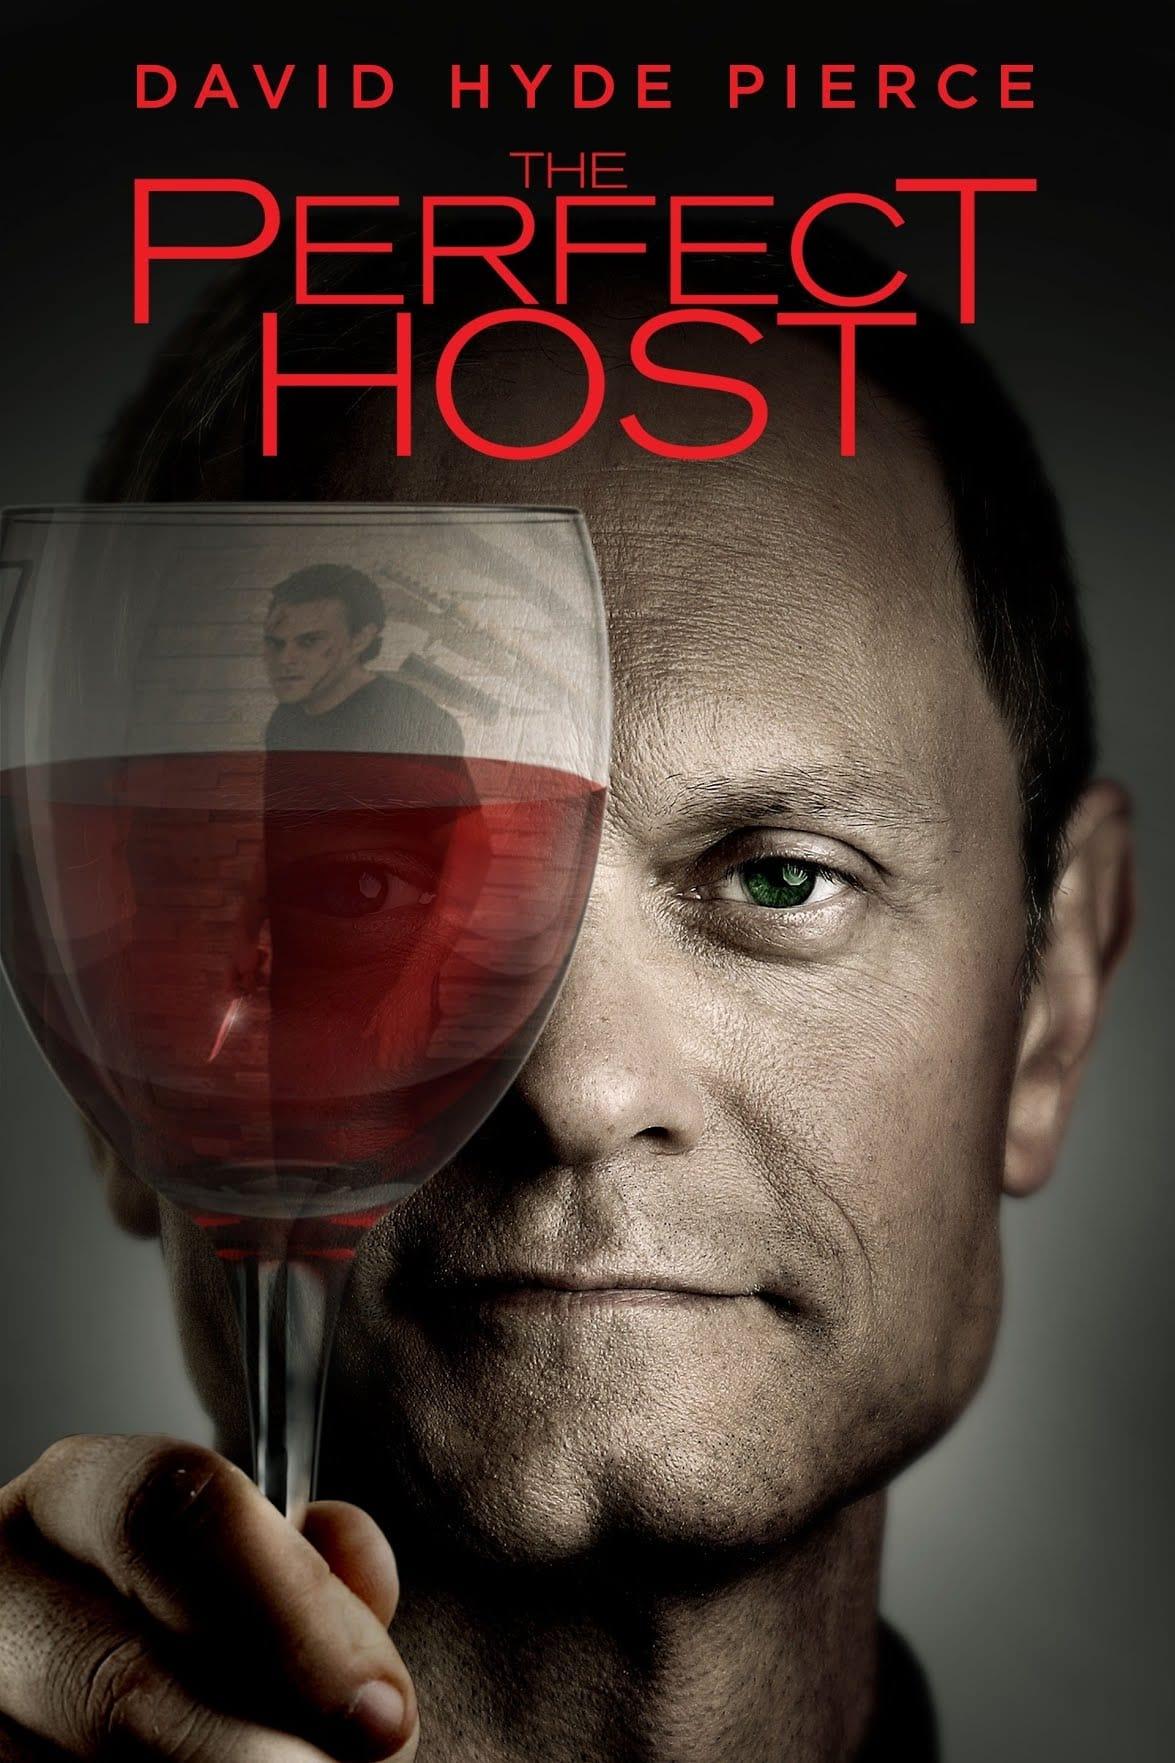 The Perfect Host poster